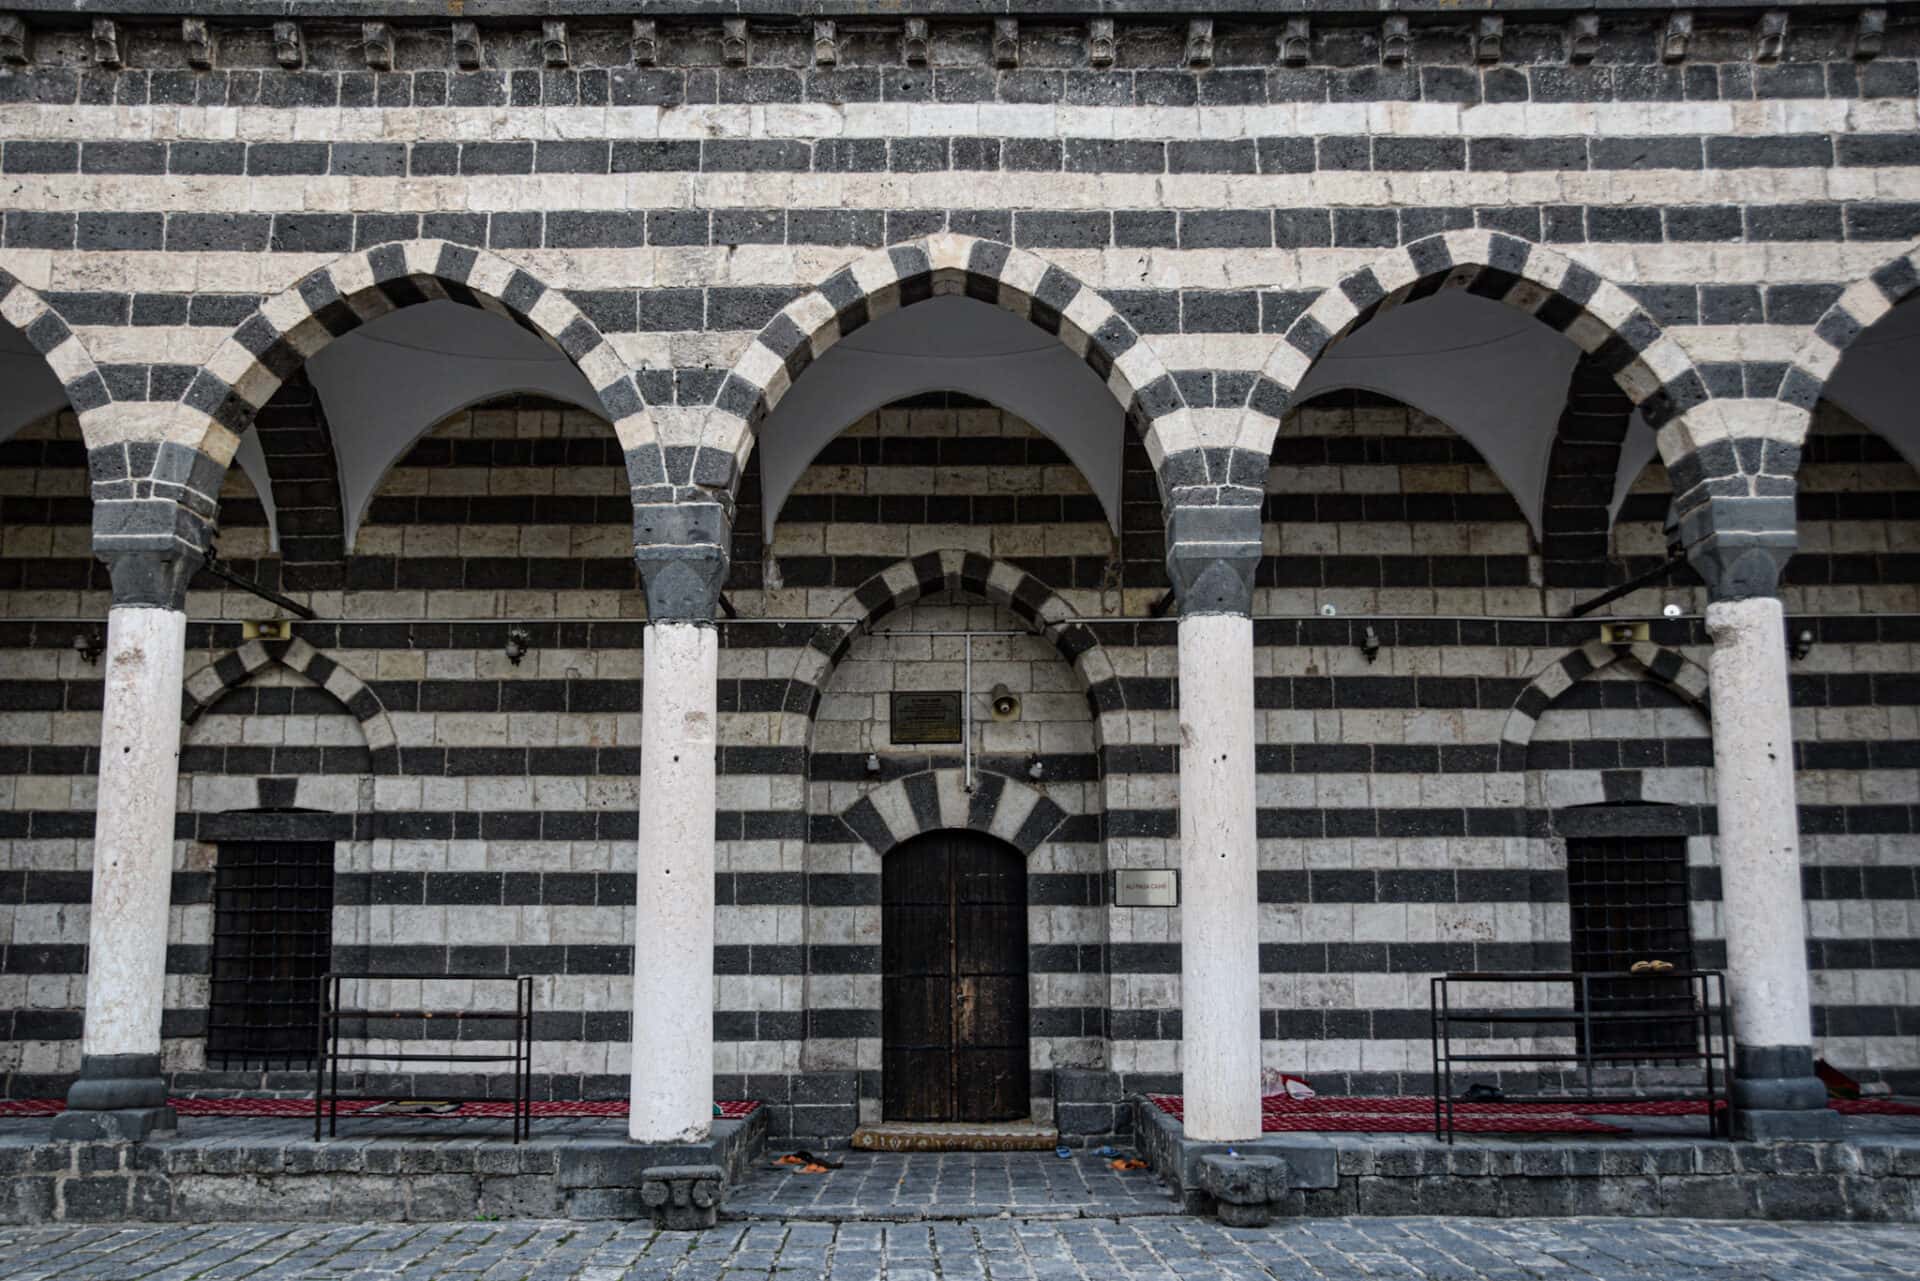 white and black striped facade of Ali Pasa mosque in Diyarbakir